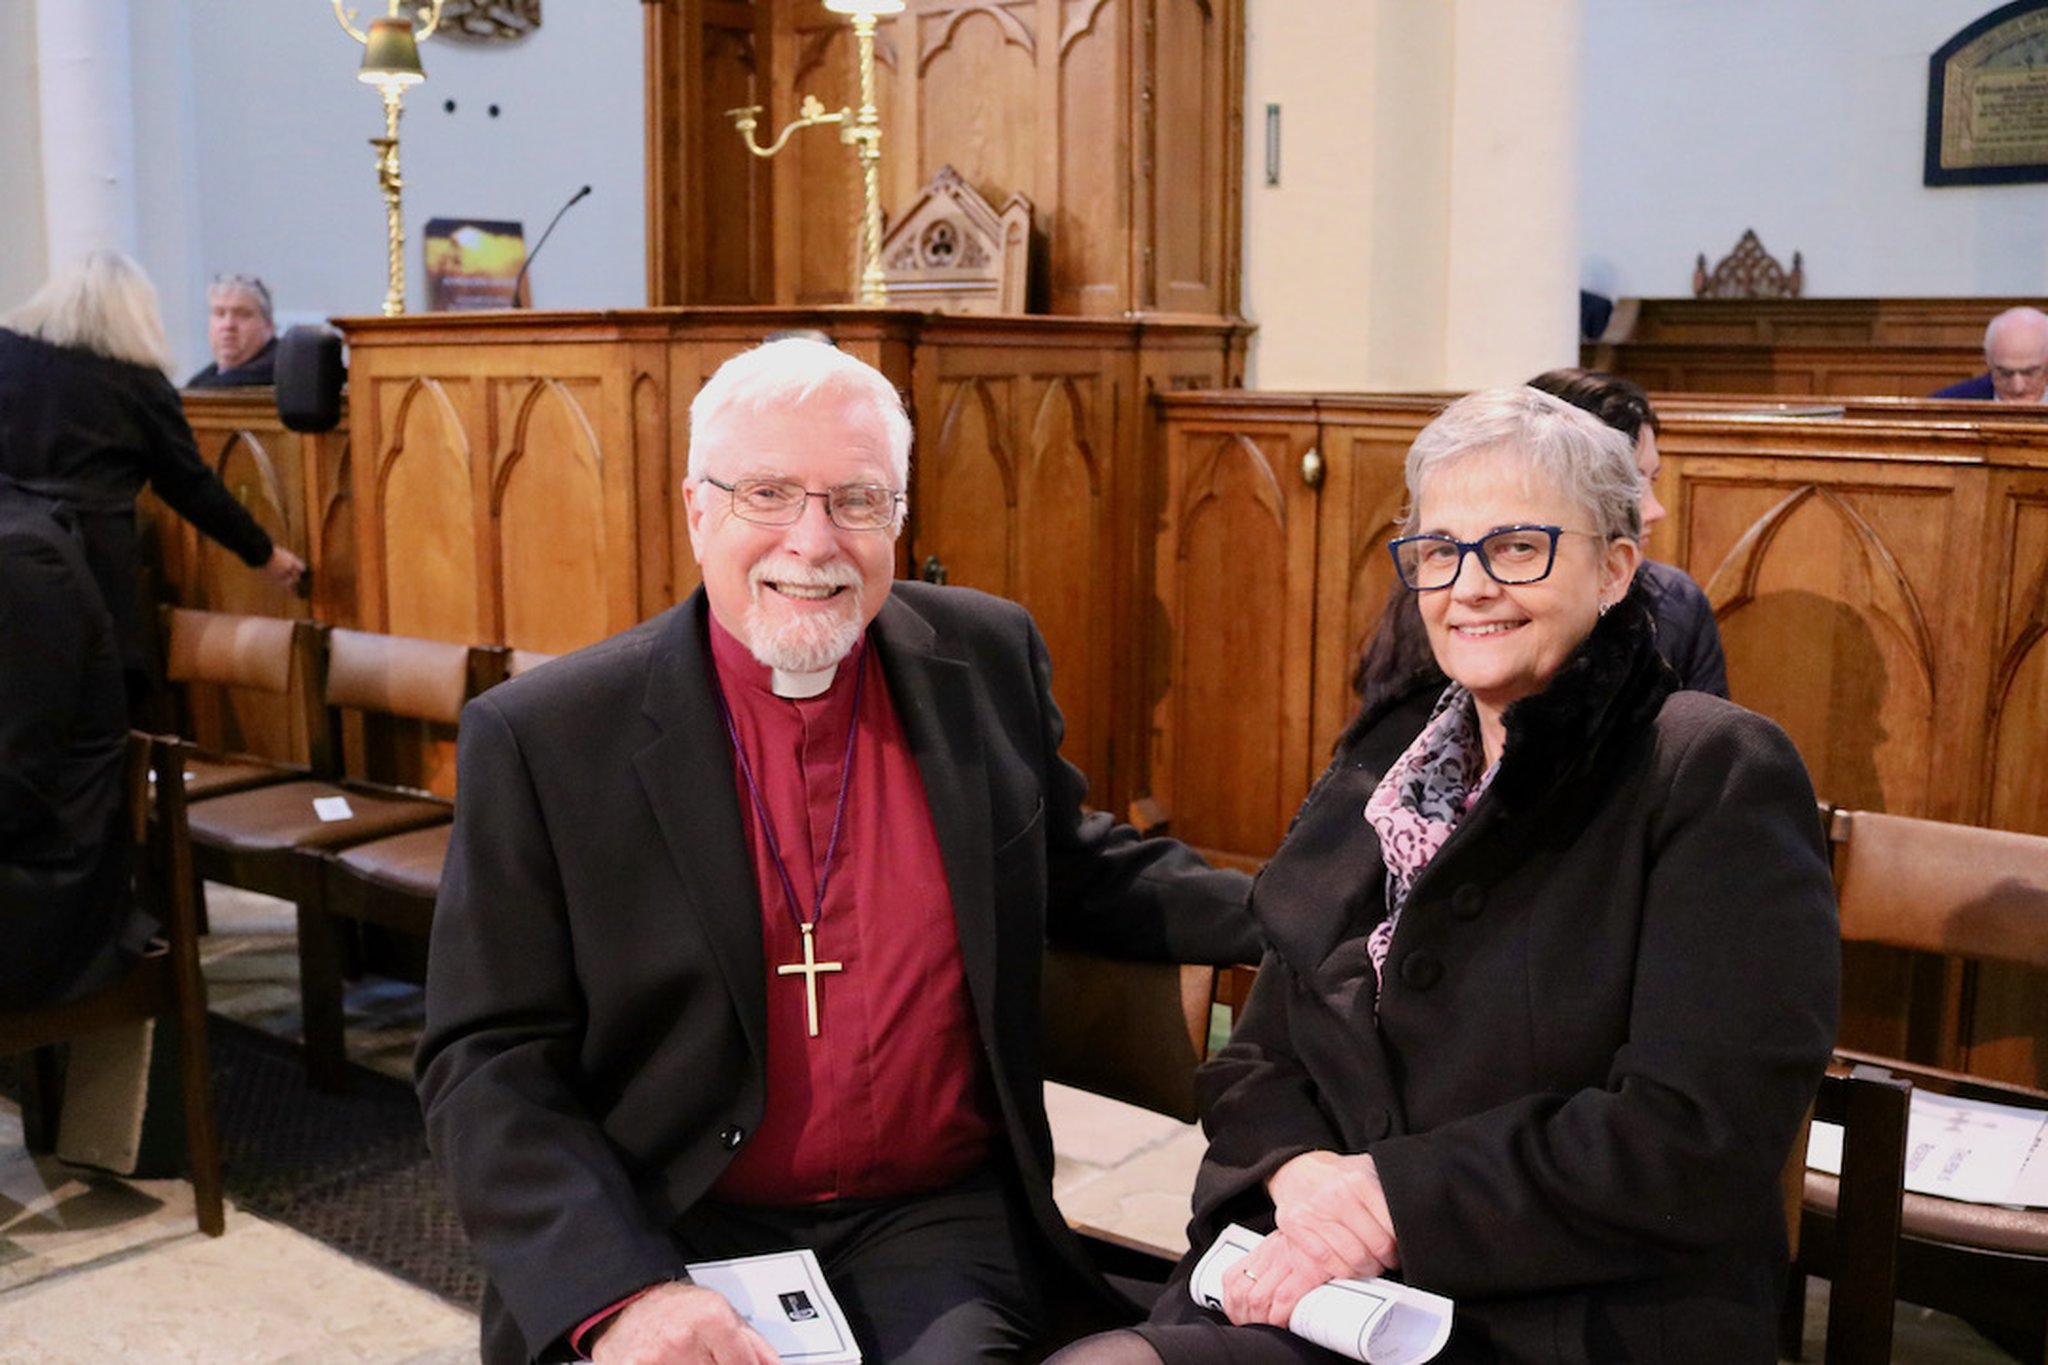 The Rt Revd Harold Miller, former bishop of the diocese, with Baroness Margaret Ritchie.